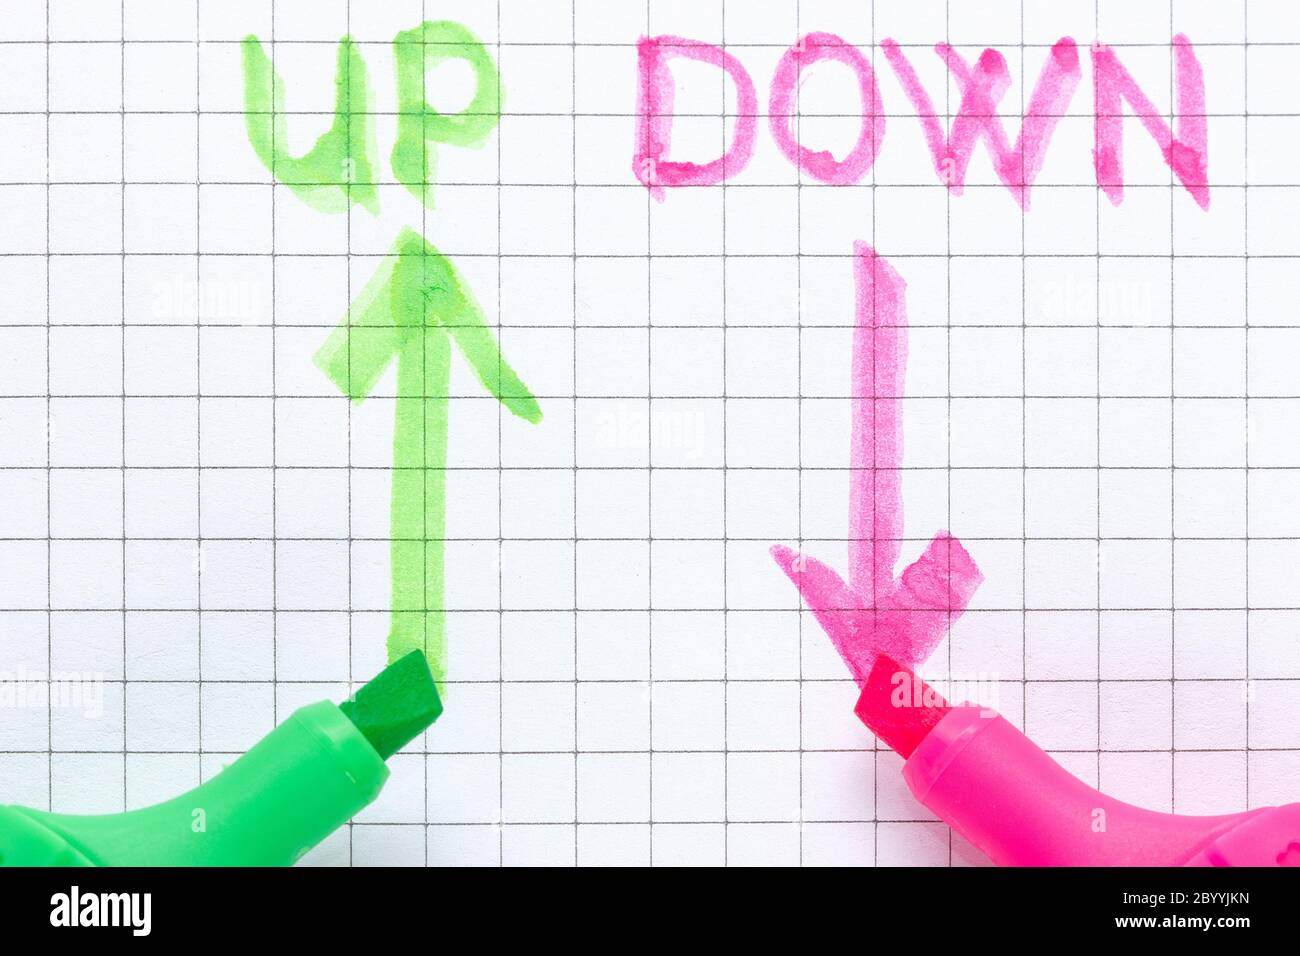 Up and down arrows Stock Photo